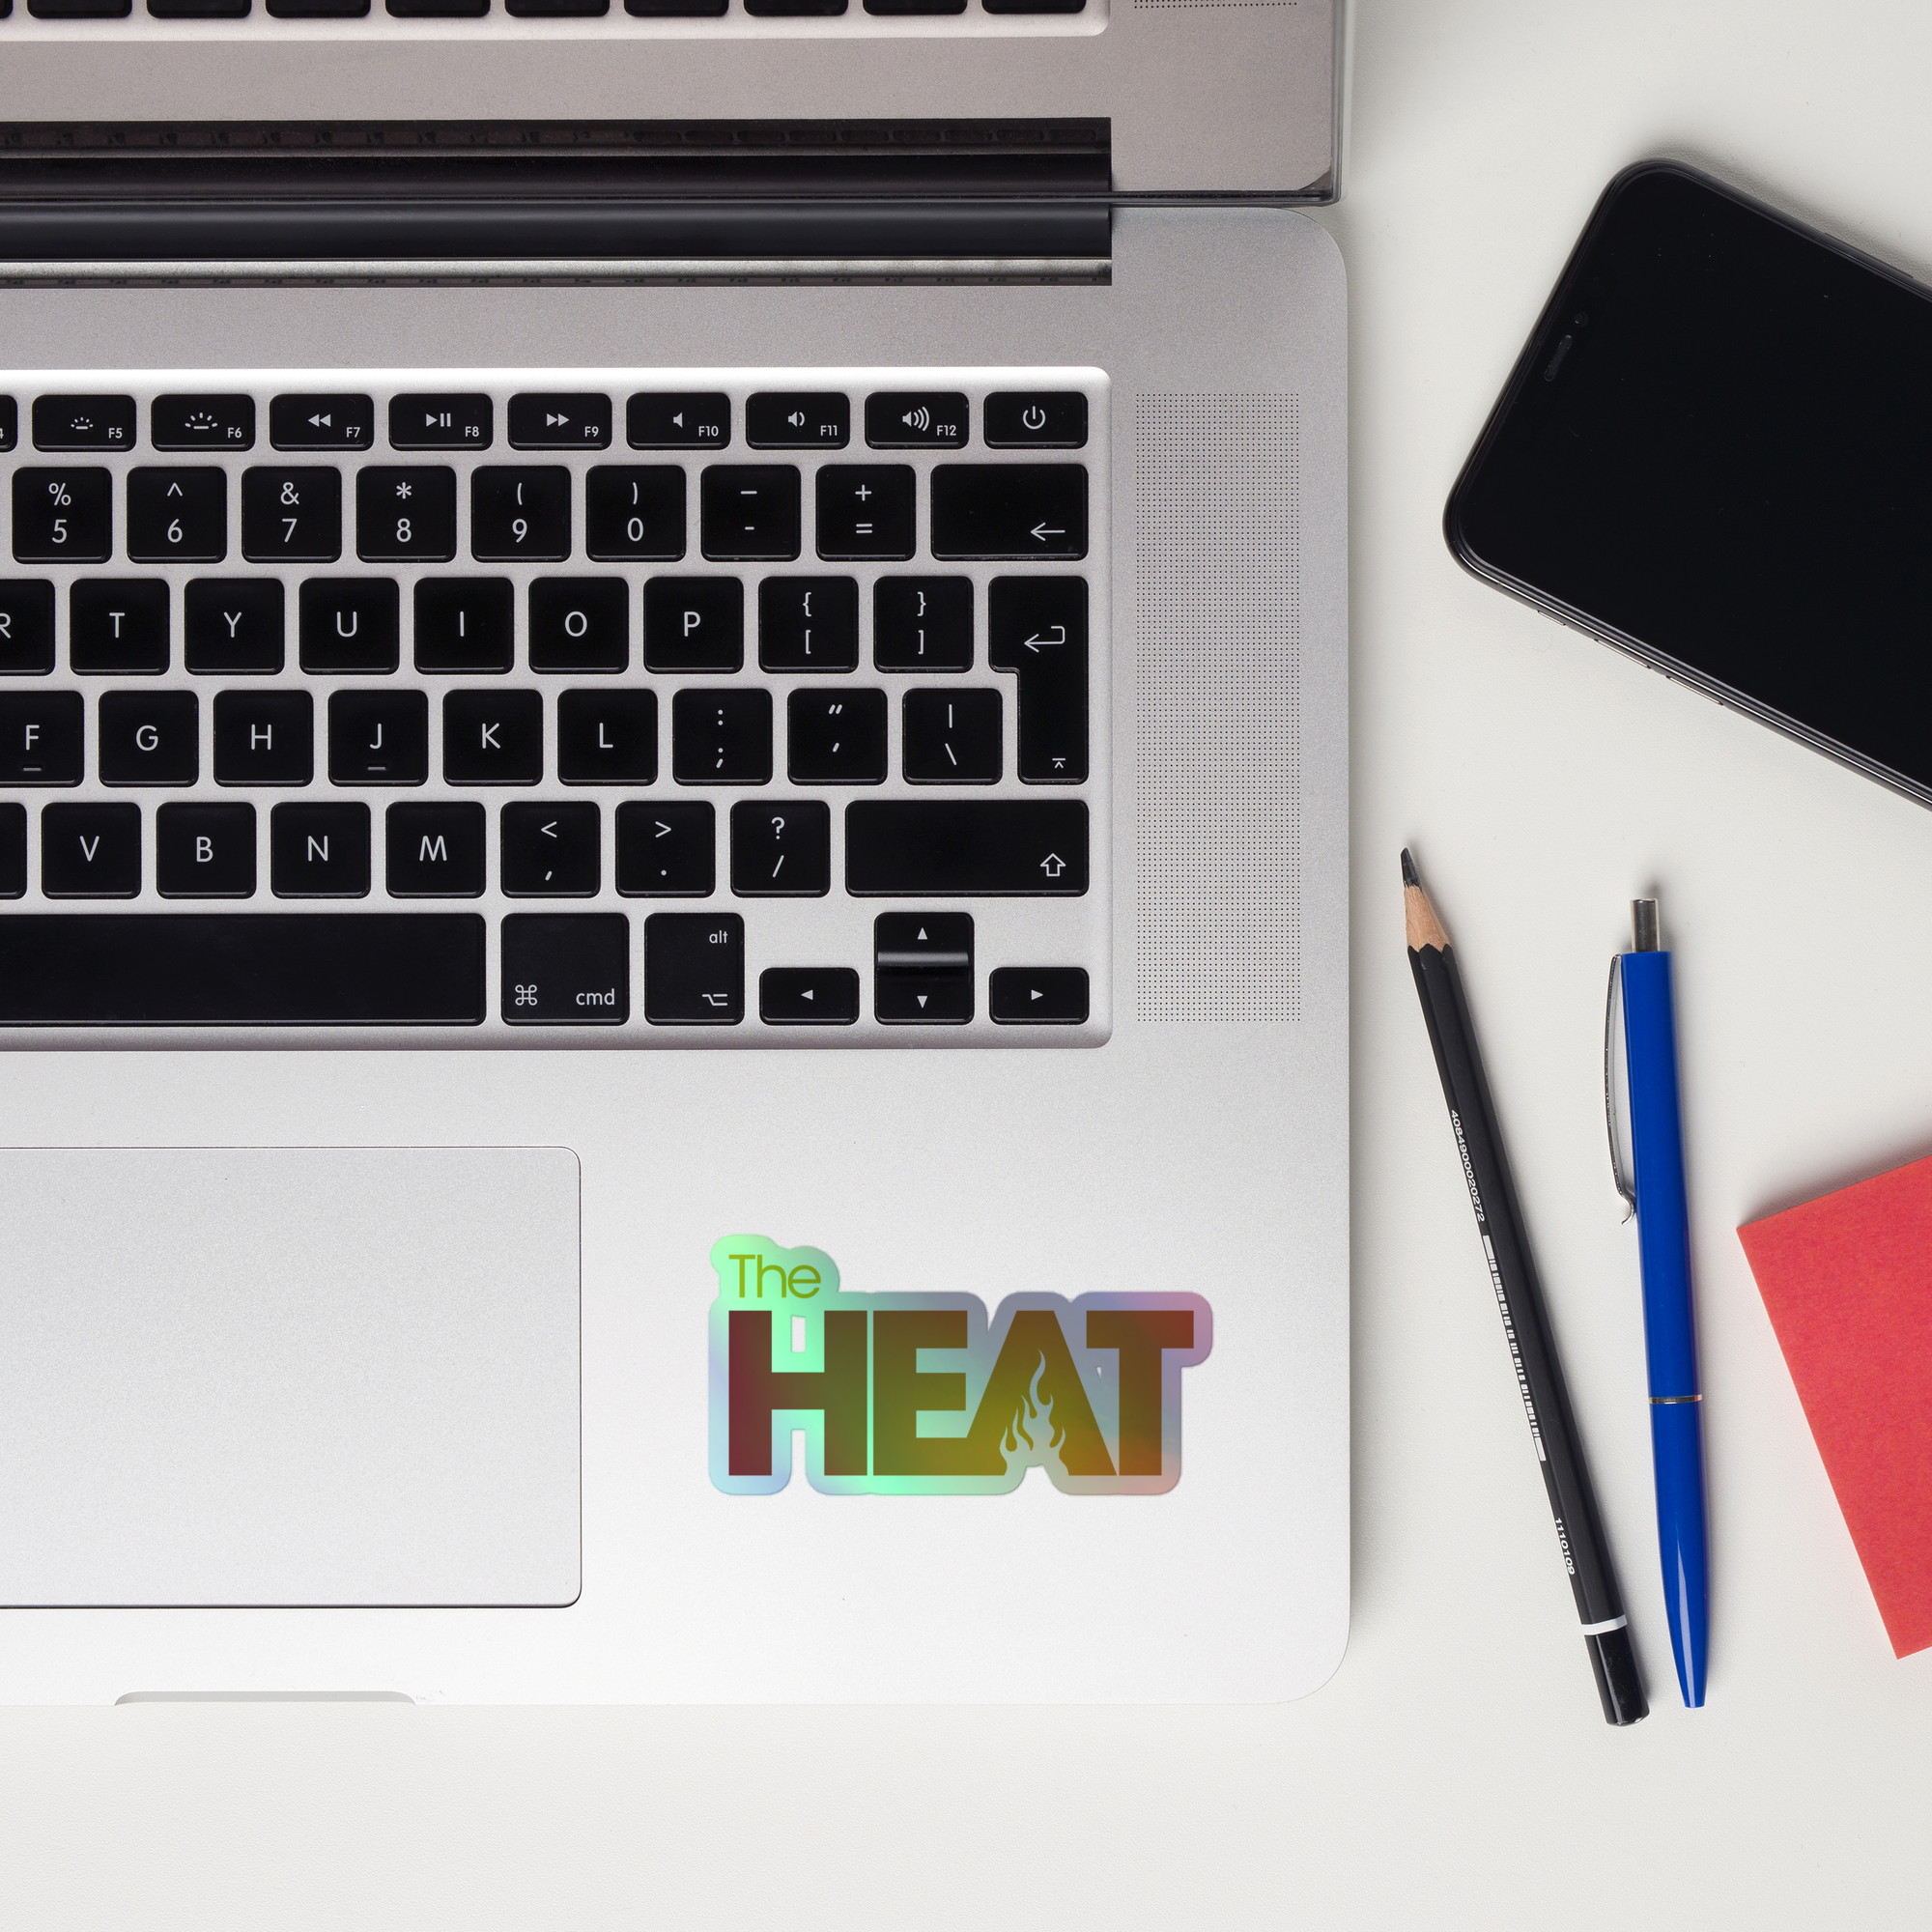 The Heat: Holographic Sticker